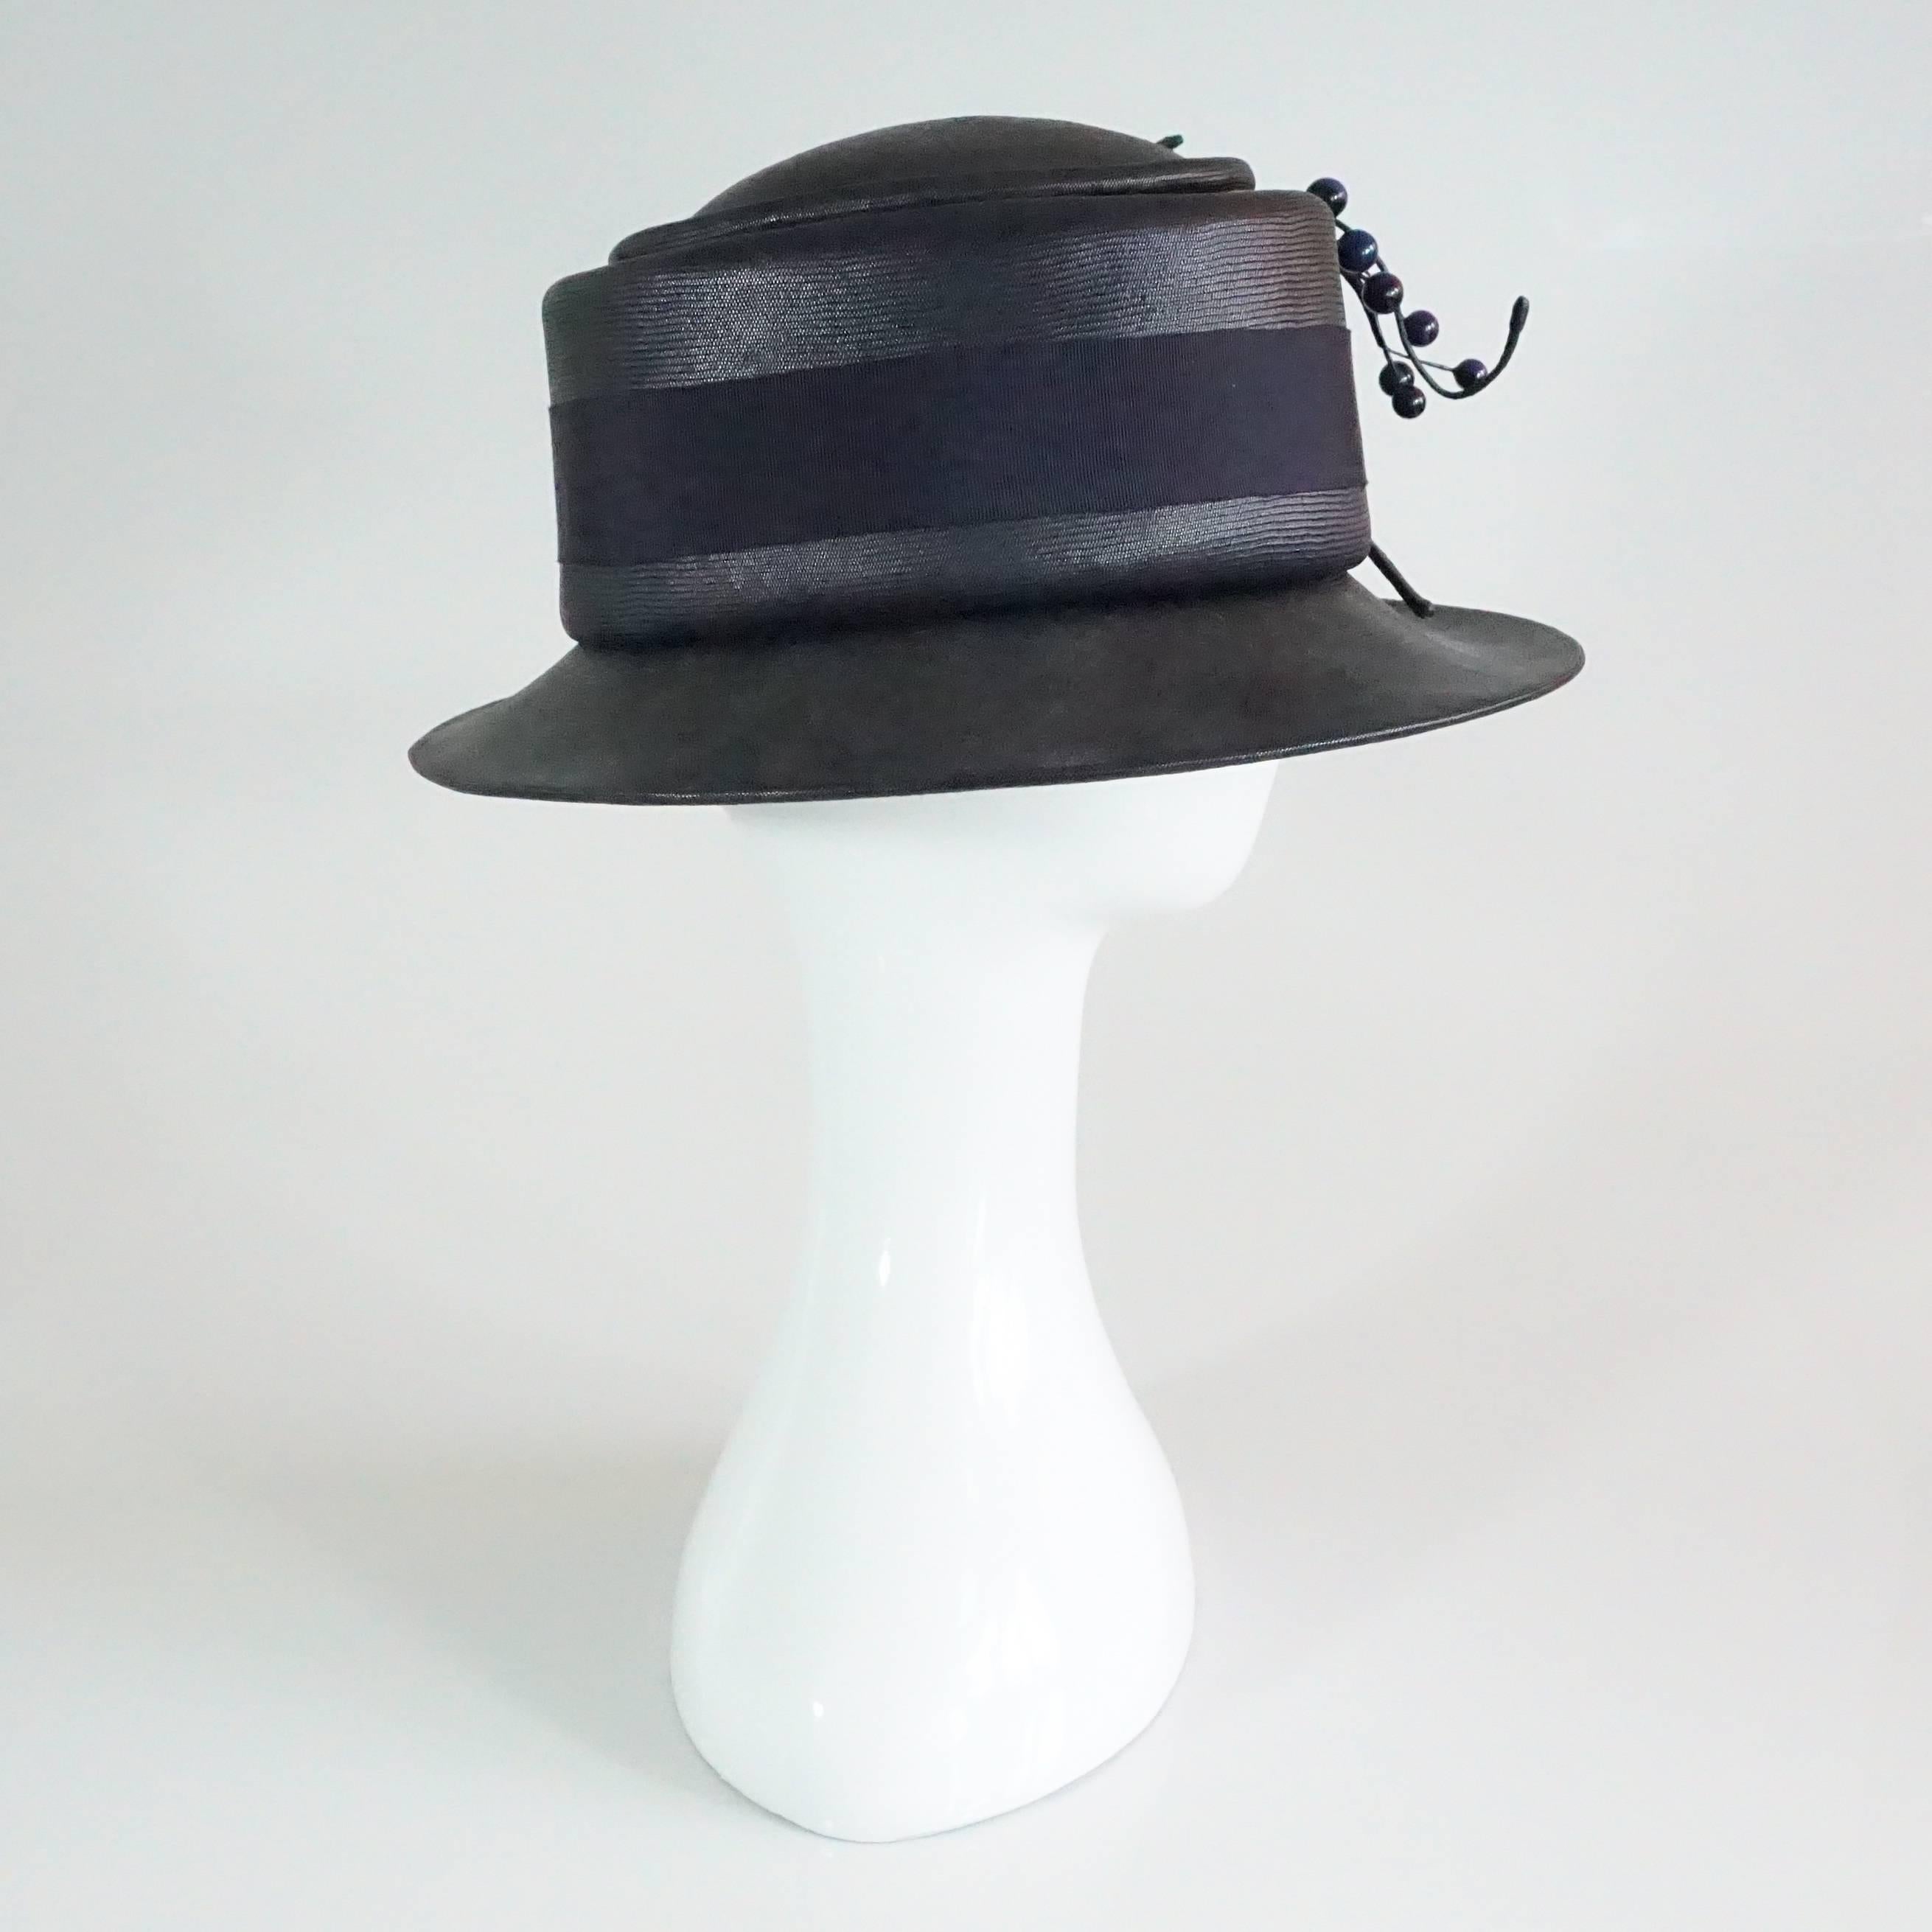 Suzanne Couture Millinery Black & Navy French Straw Hat w/ Ribbon & Bead detail. This hat is in excellent condition.
Measurements:
Inside Circumference: 20.5